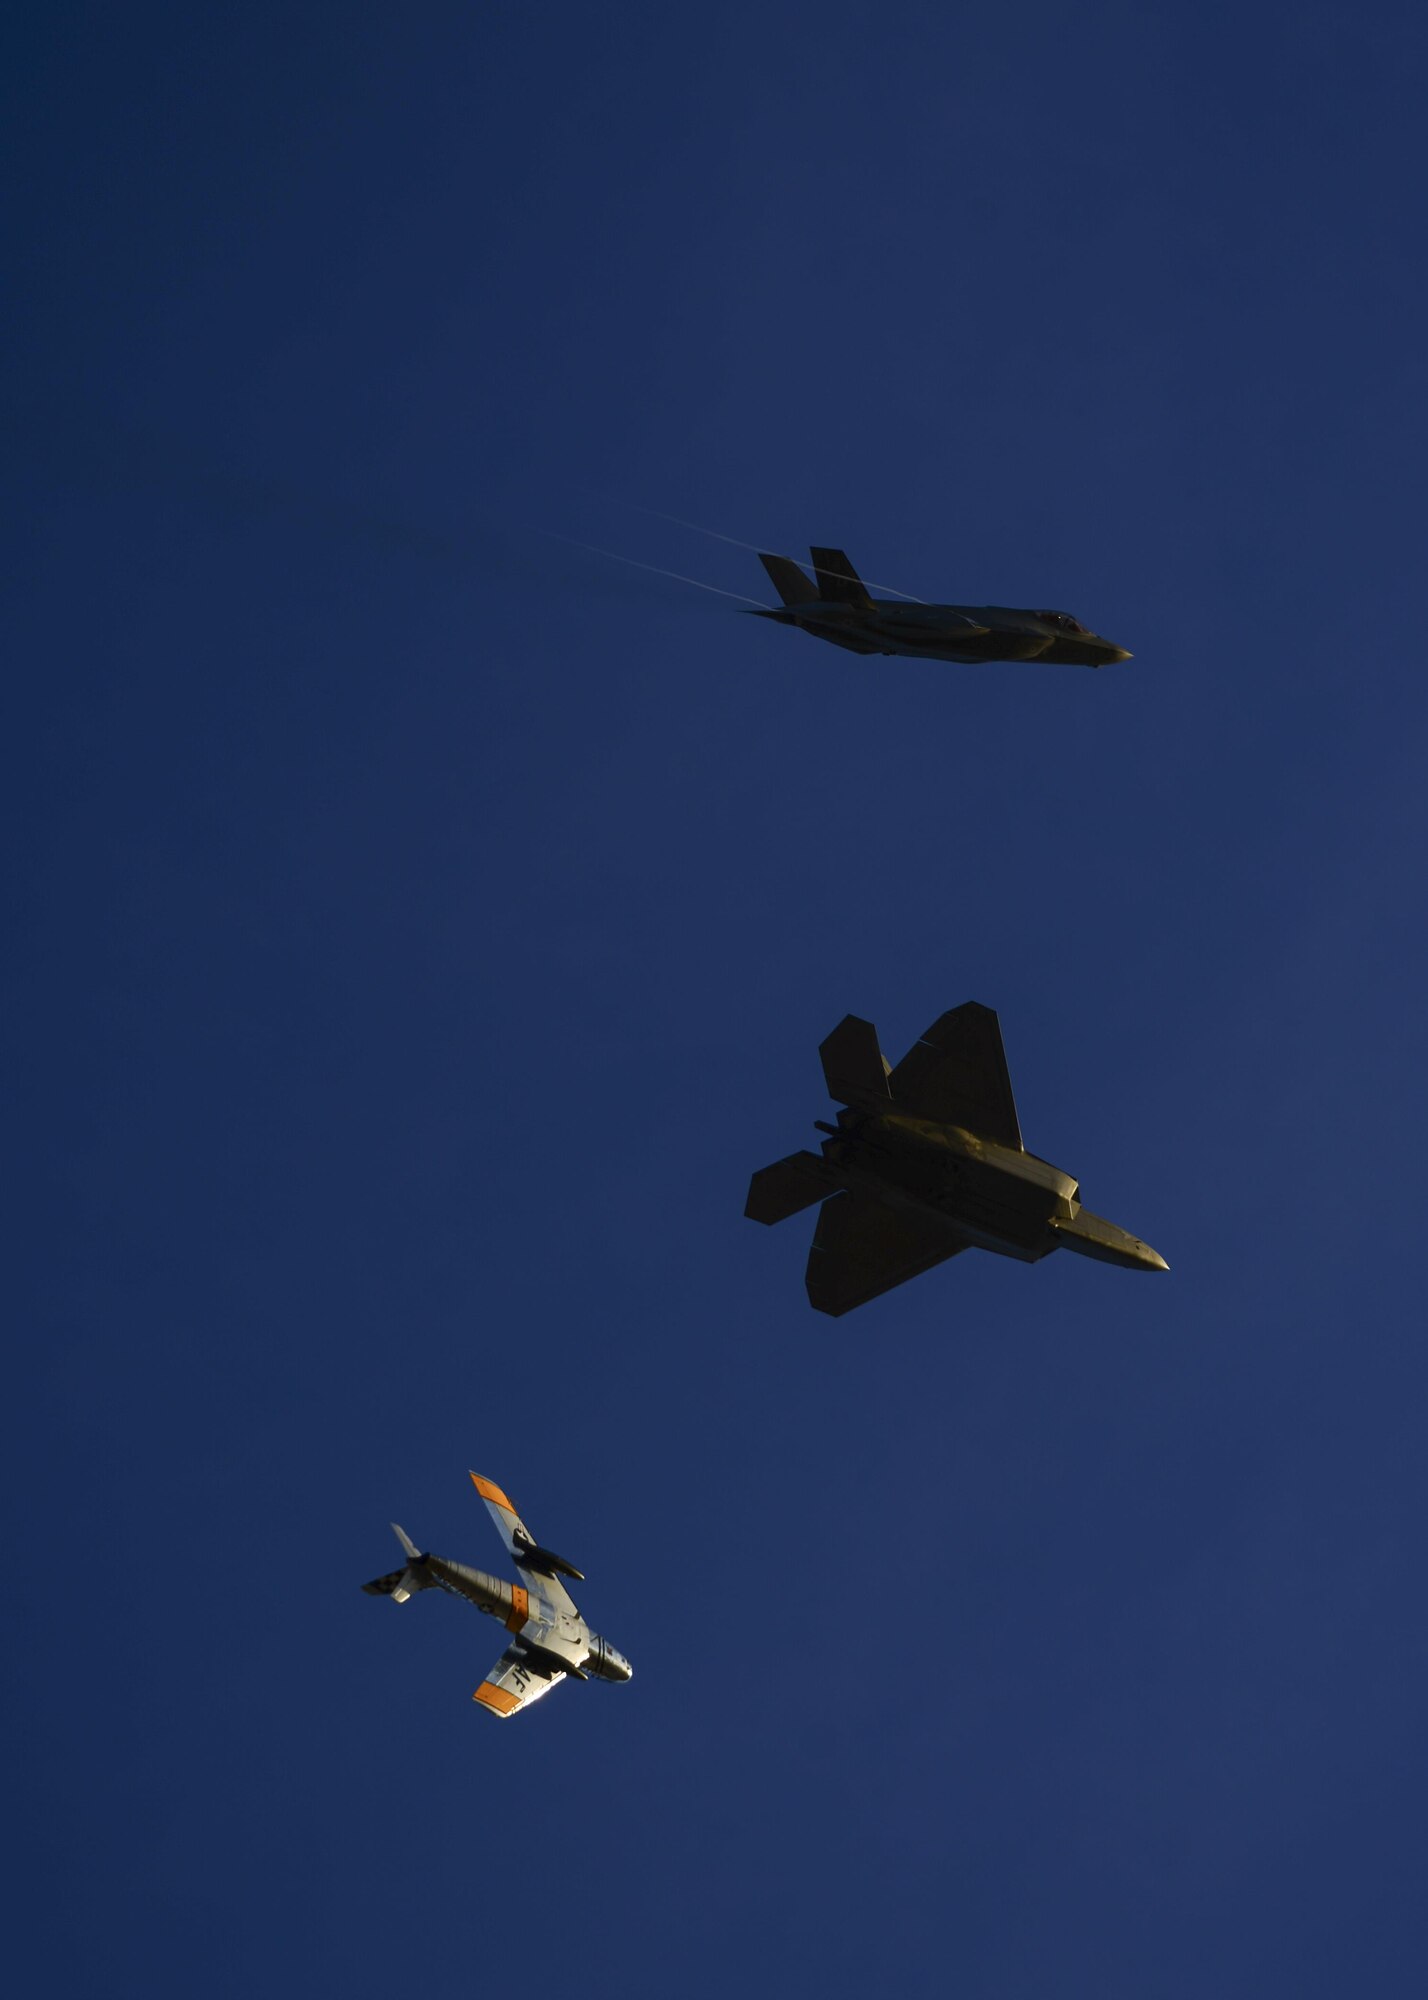 A U.S. Air Force F-22 Raptor, F-35 Lightning II and F-86 Sabre fly in formation during the 2017 Heritage Flight Training and Certification Course at Davis-Monthan Air Force Base, Ariz., Feb. 10, 2017. The 20th annual training event has been held at D-M since 2001 and features aerial demonstrations from historical and modern fighter aircraft. (U.S. Air Force photo by Senior Airman Chris Drzazgowski)